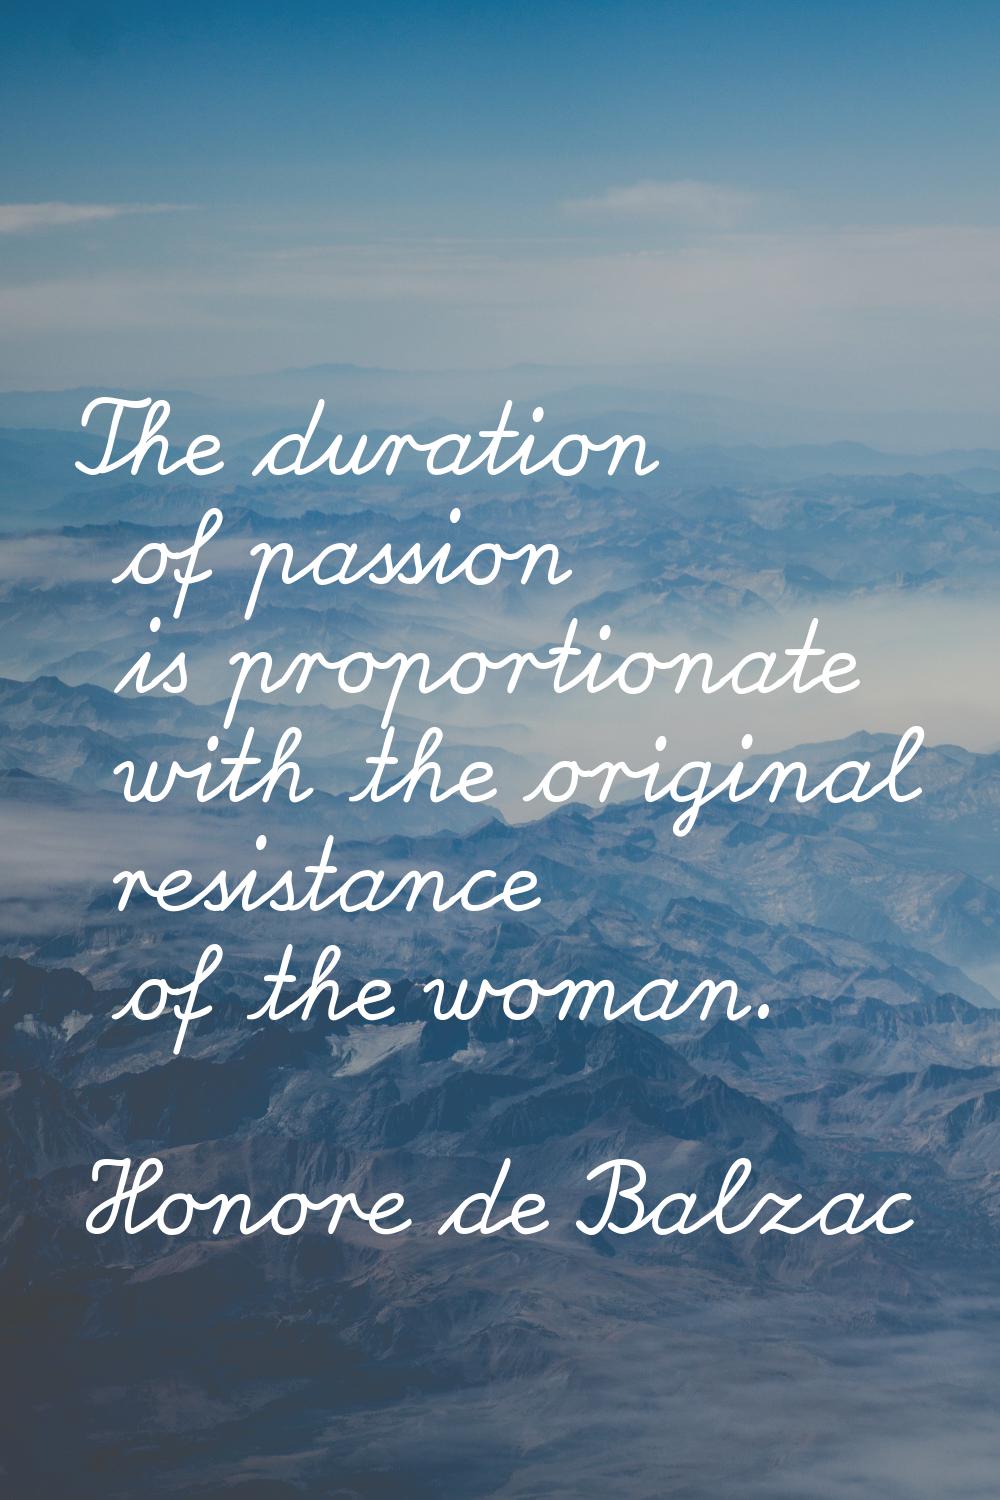 The duration of passion is proportionate with the original resistance of the woman.